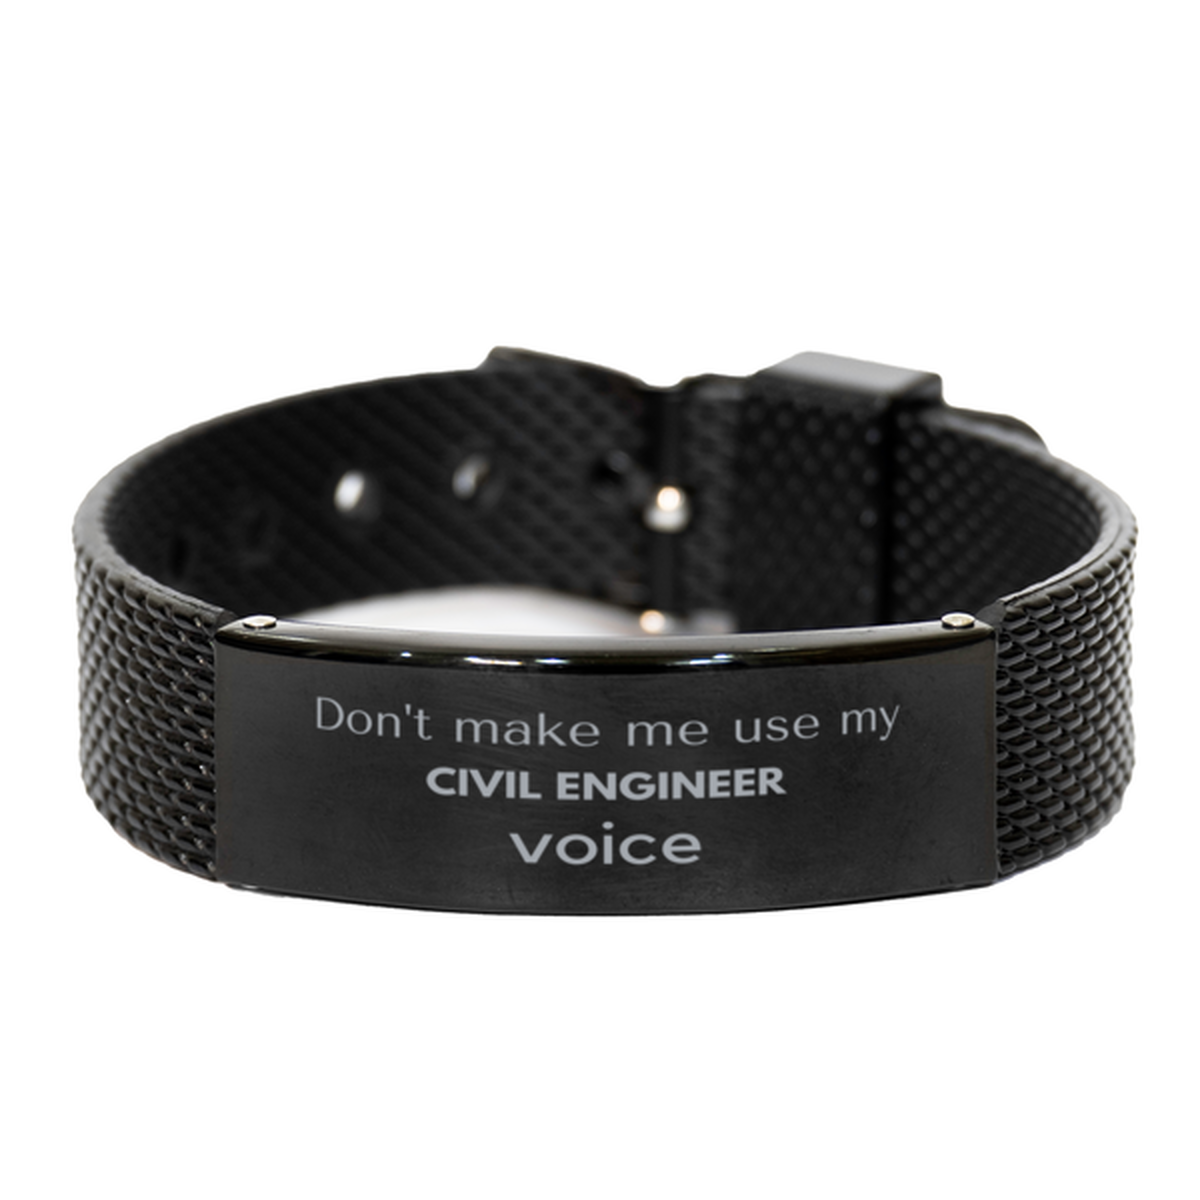 Don't make me use my Civil Engineer voice, Sarcasm Civil Engineer Gifts, Christmas Civil Engineer Black Shark Mesh Bracelet Birthday Unique Gifts For Civil Engineer Coworkers, Men, Women, Colleague, Friends